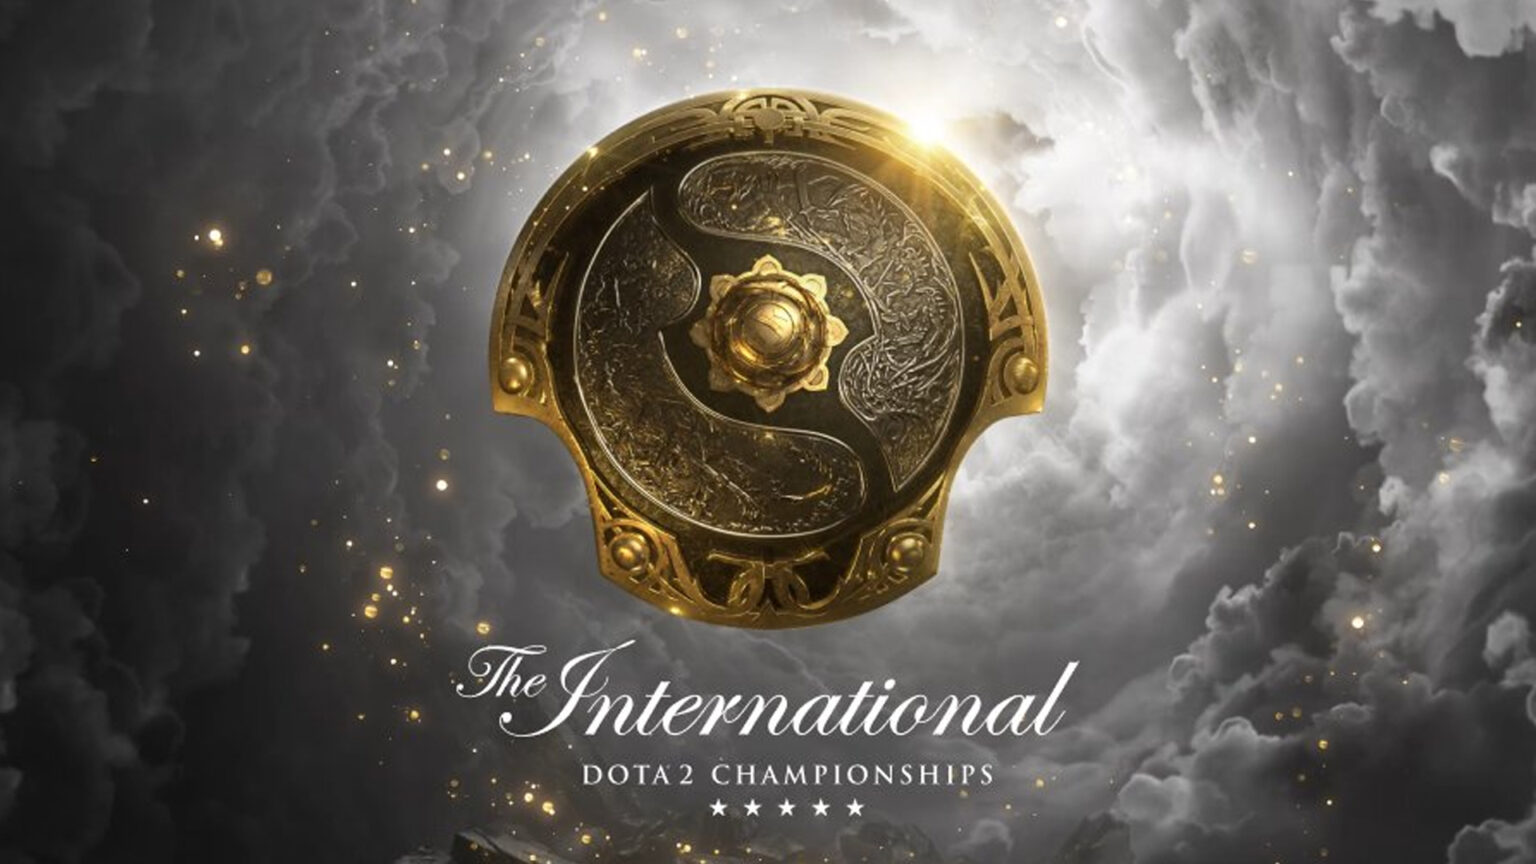 Dota 2 TI10: Schedule, results, format, prize pool, and where to watch | ONE Esports